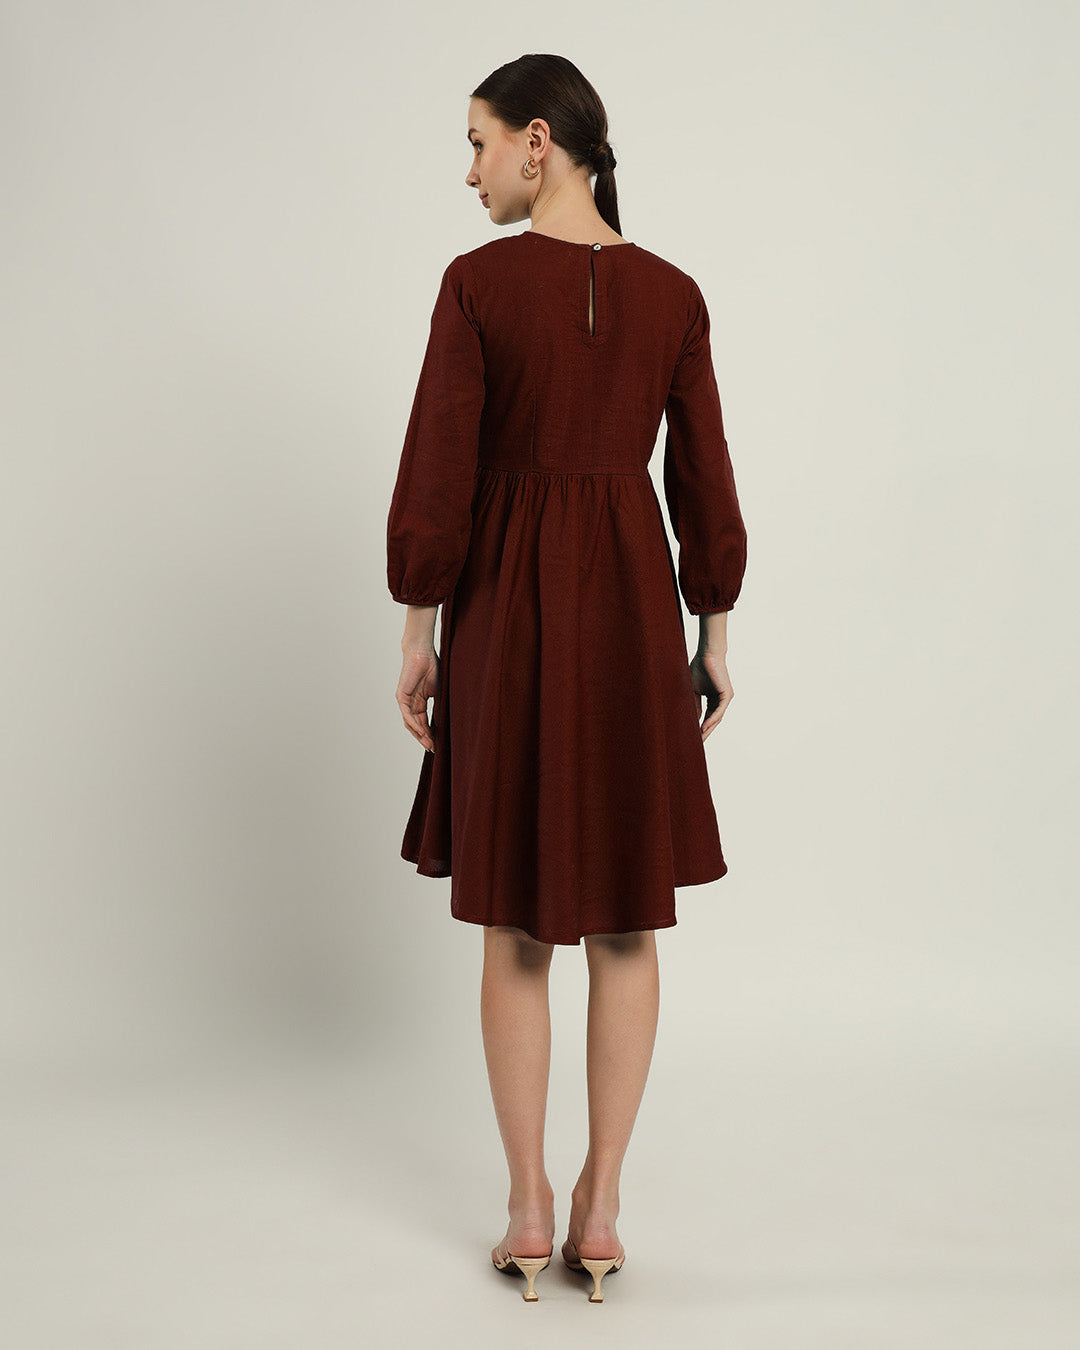 The Exeter Rouge Cotton Dress